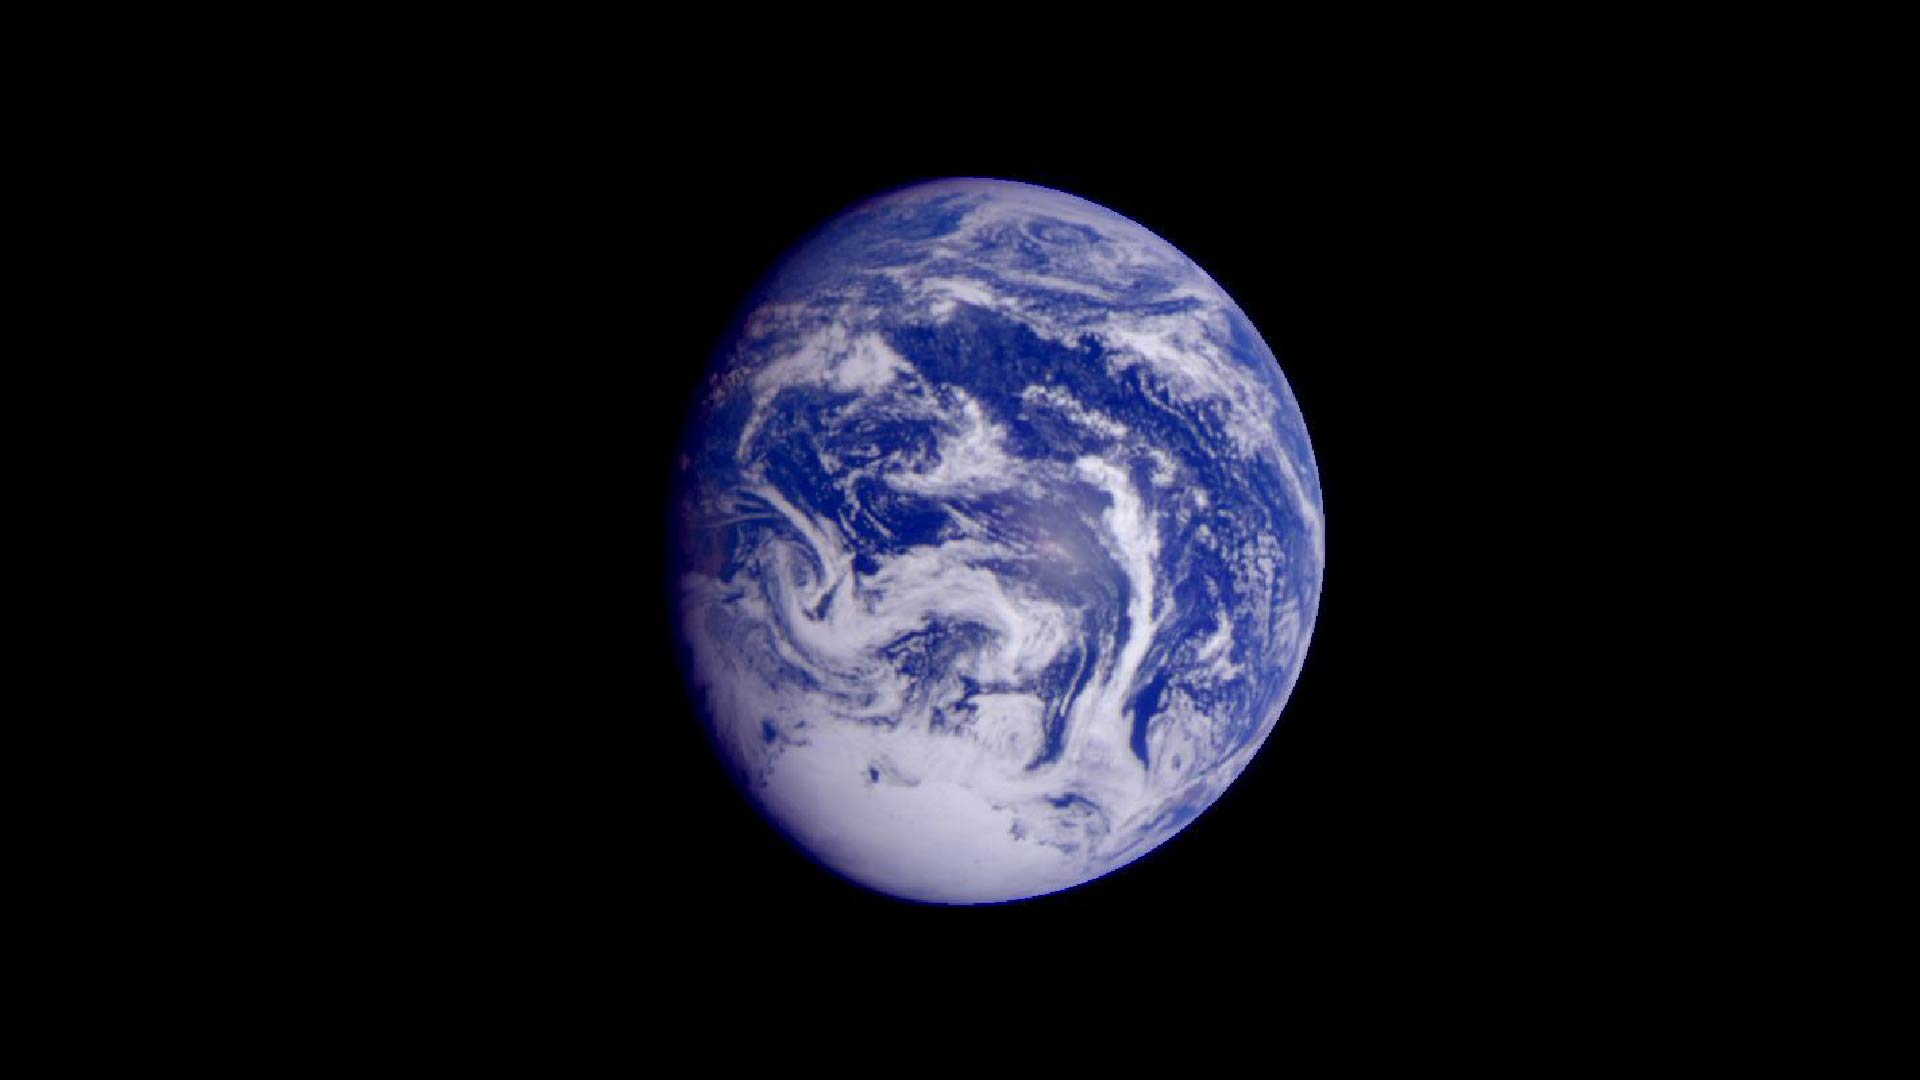 An image of Earth from space, with only ocean and clouds visible.